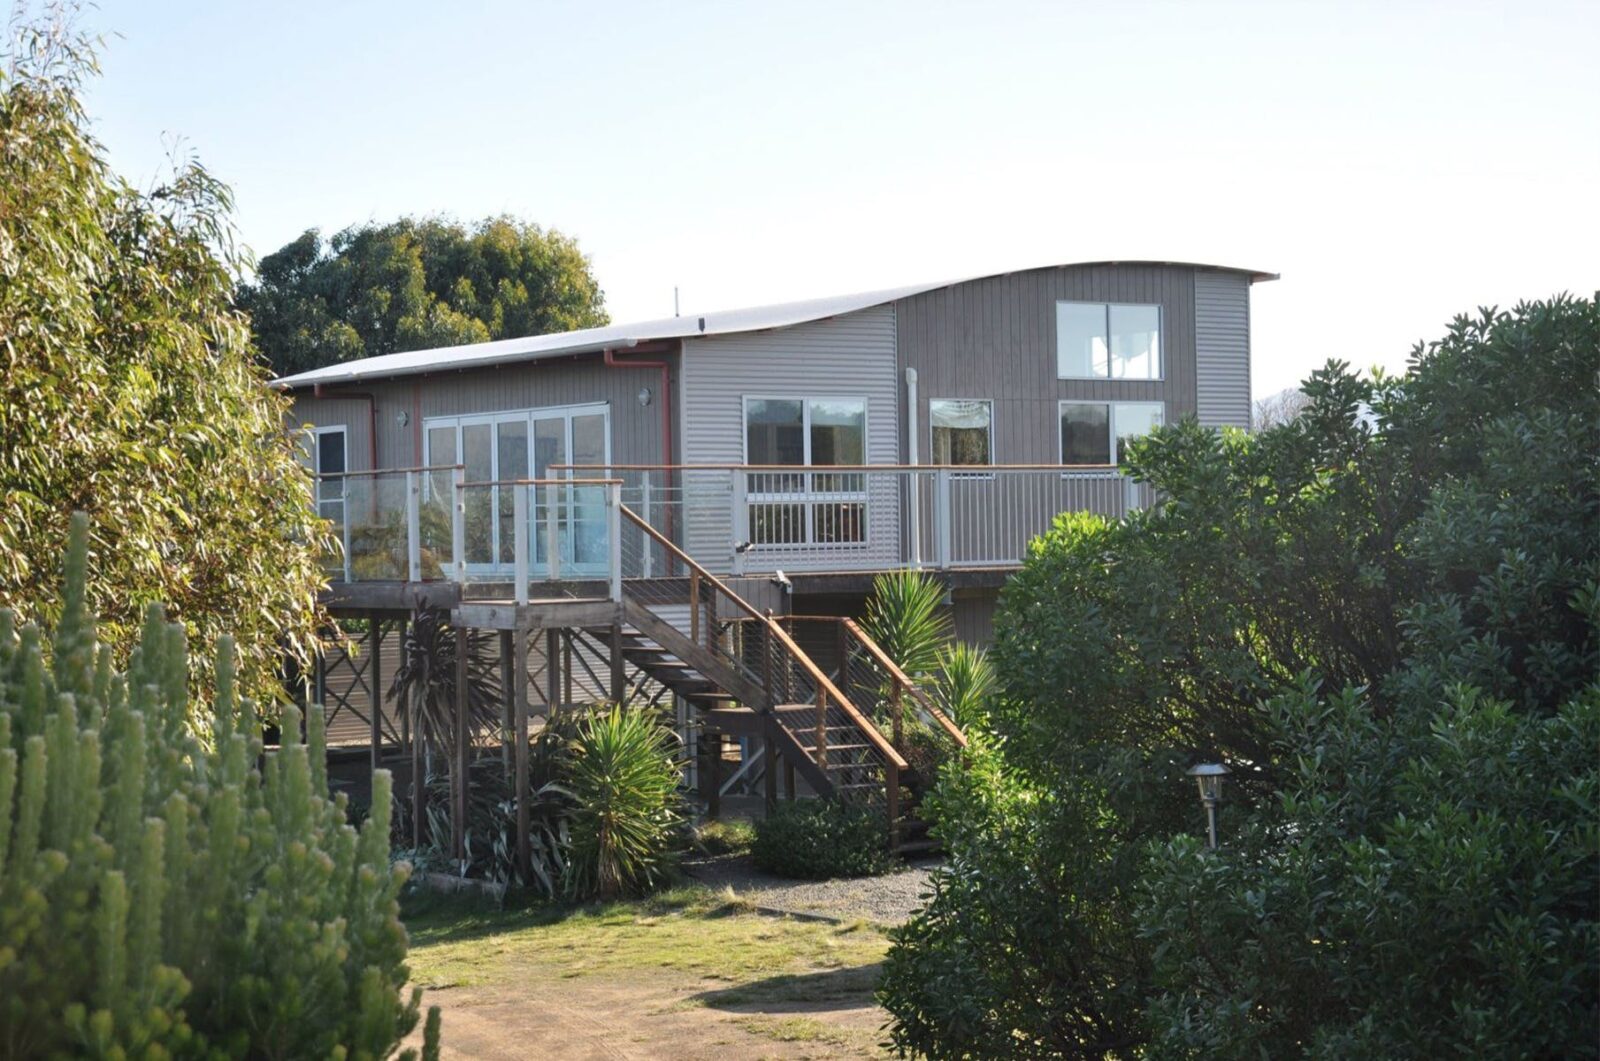 Perched on the headland the modern Seymour Waves has stunning views down the beach to Bicheno